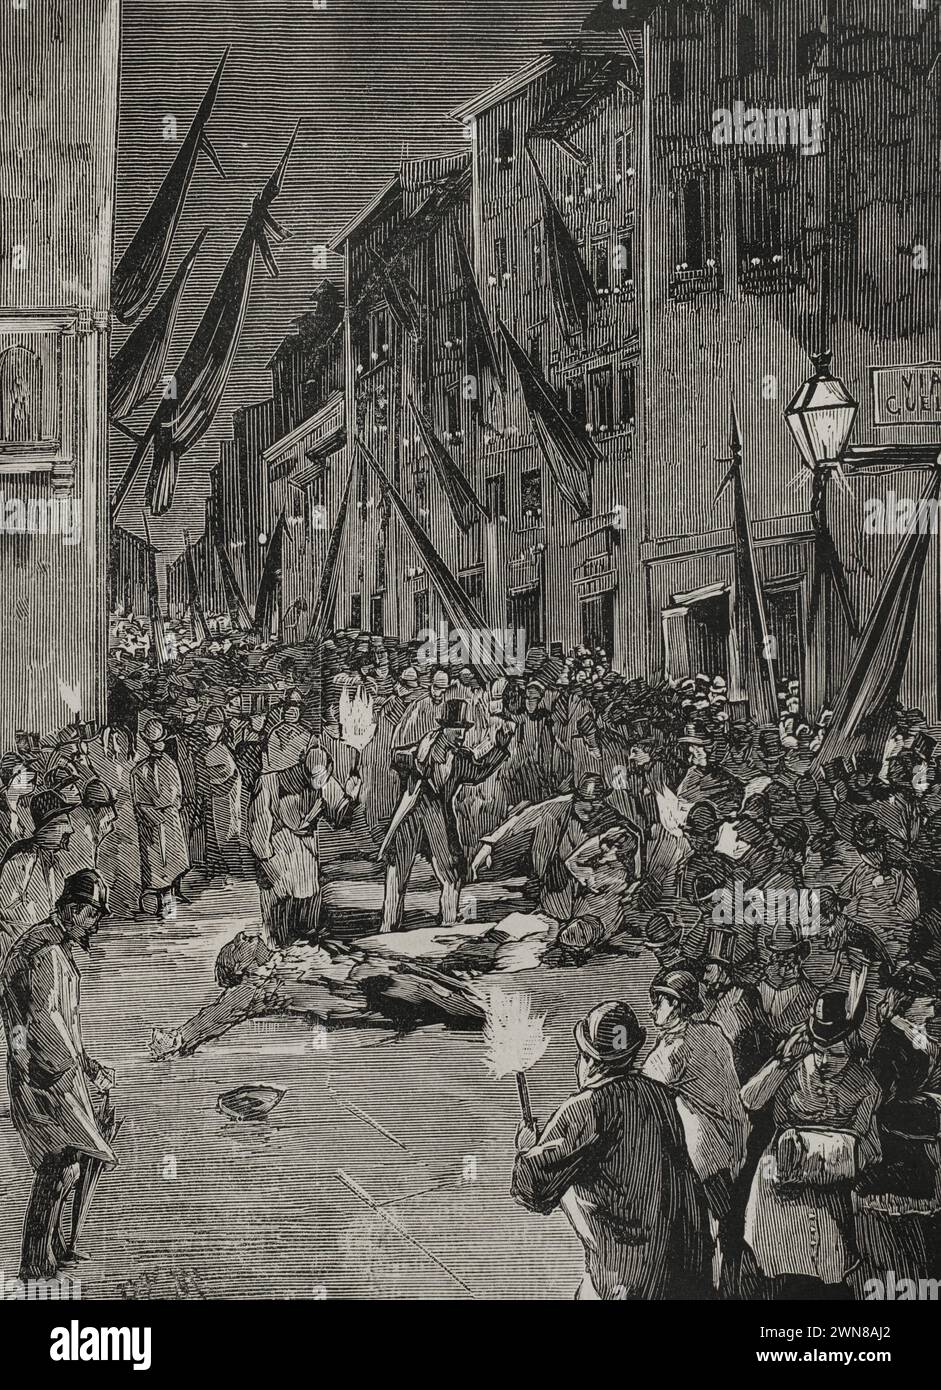 Florence, Italy. Explosion of an Orsini bomb in Via Guelfa, thrown into a crowd of spectators gathered during a monarchist demonstration on 18 November 1878. Engraving. La Ilustración Española y Americana (The Spanish and American Illustration), 1878. Stock Photo